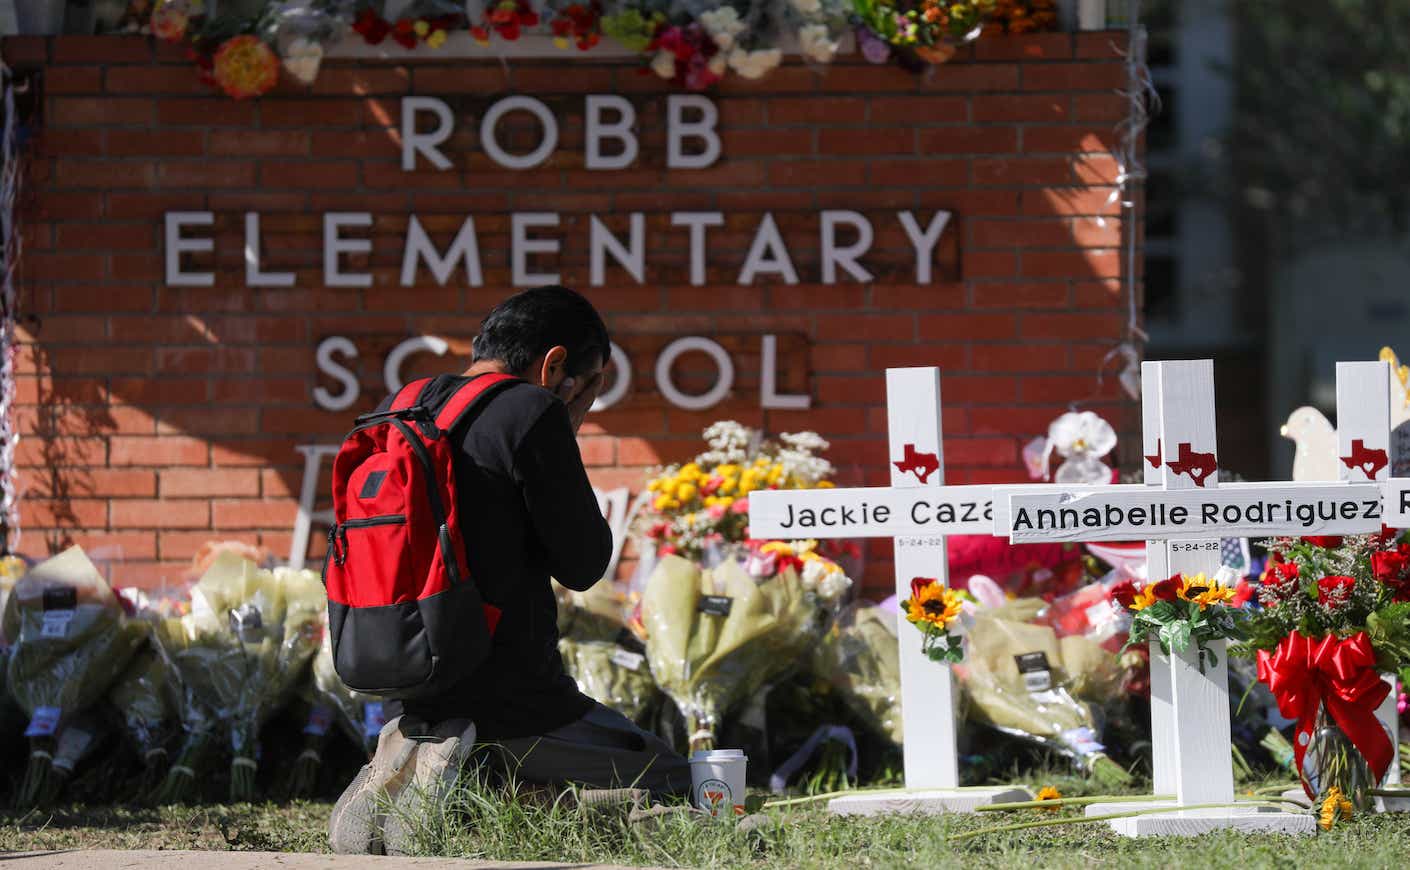 A man prays in front of a makeshift memorial outside Robb Elementary School in Uvalde, Texas